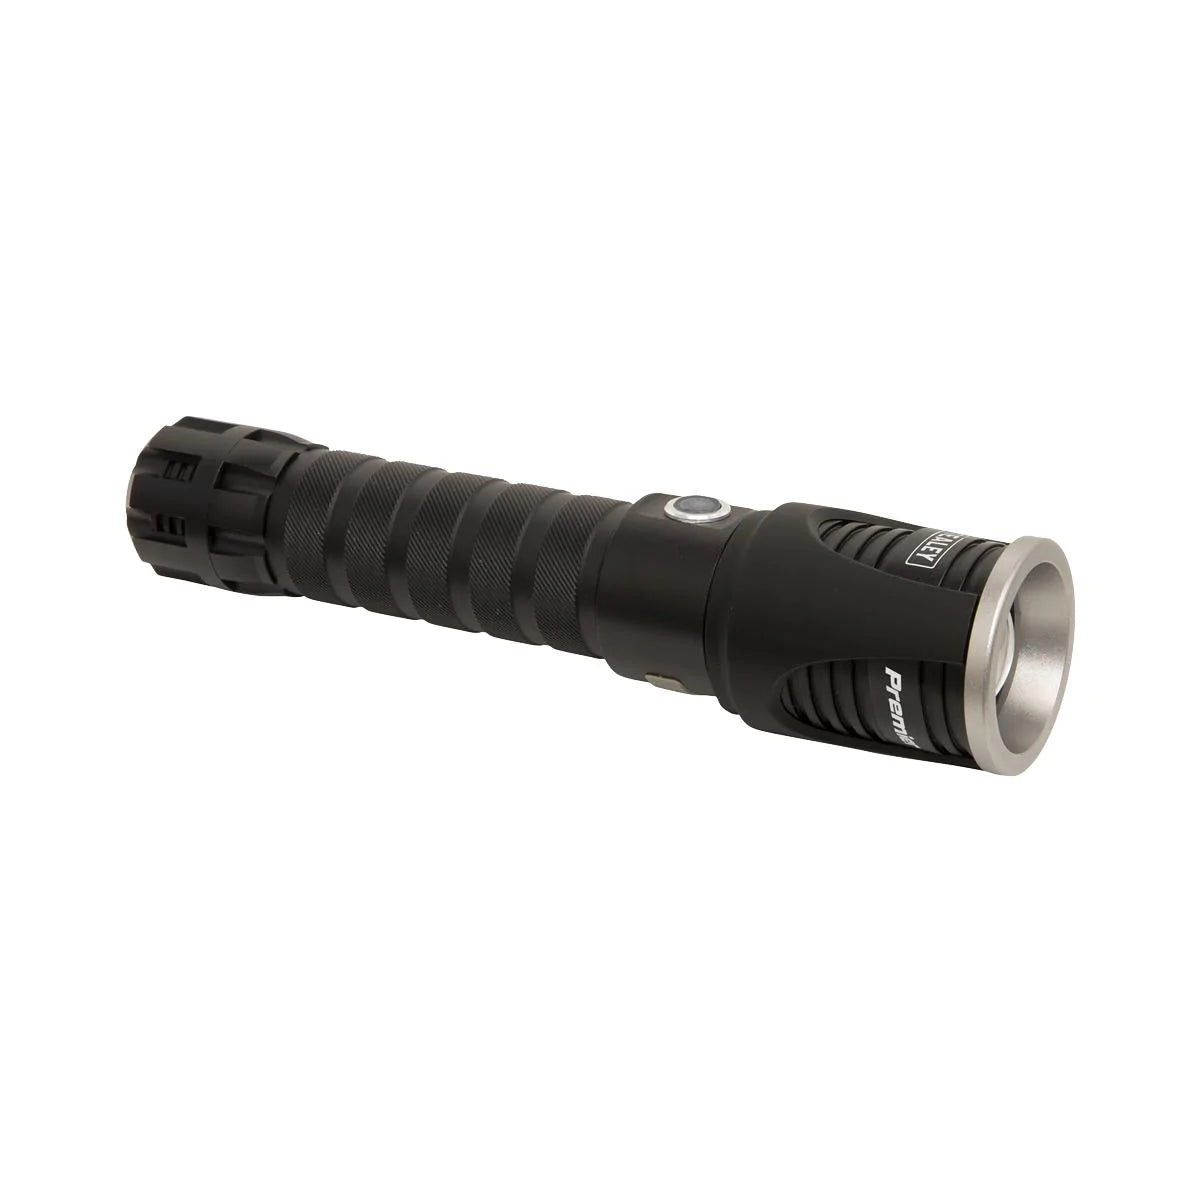 Aluminium Torch 10W CREE* XPL LED Adjustable Focus Rechargeable with USB Port